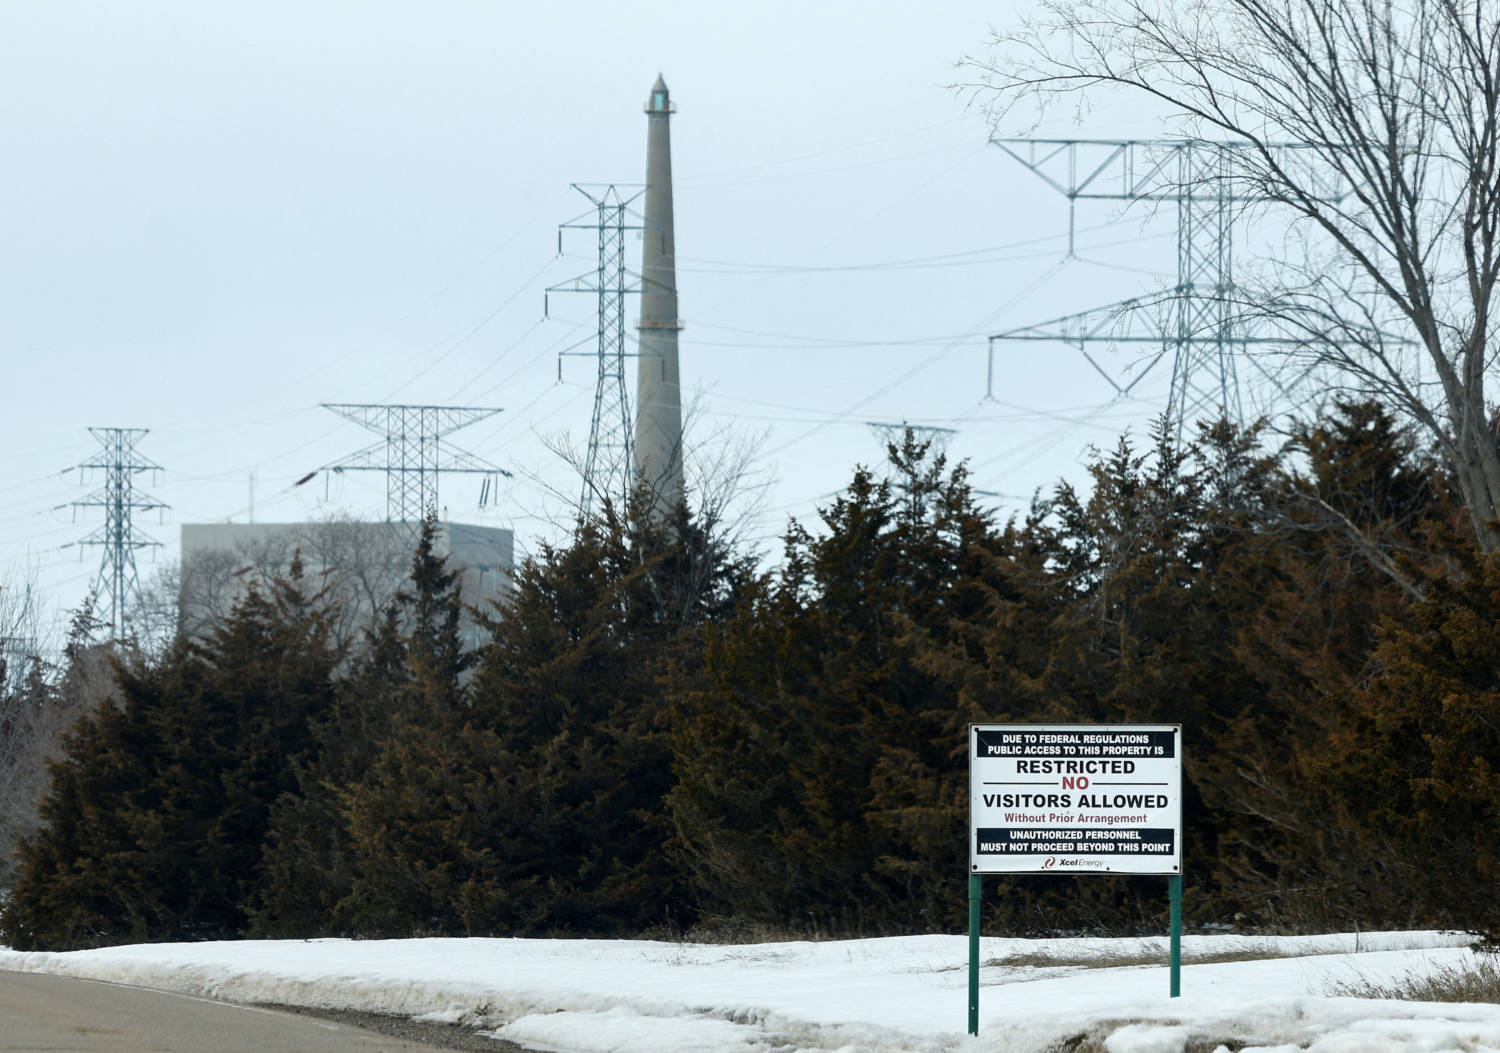 File Photo: Xcel Energy's Monticello Nuclear Generating Plant